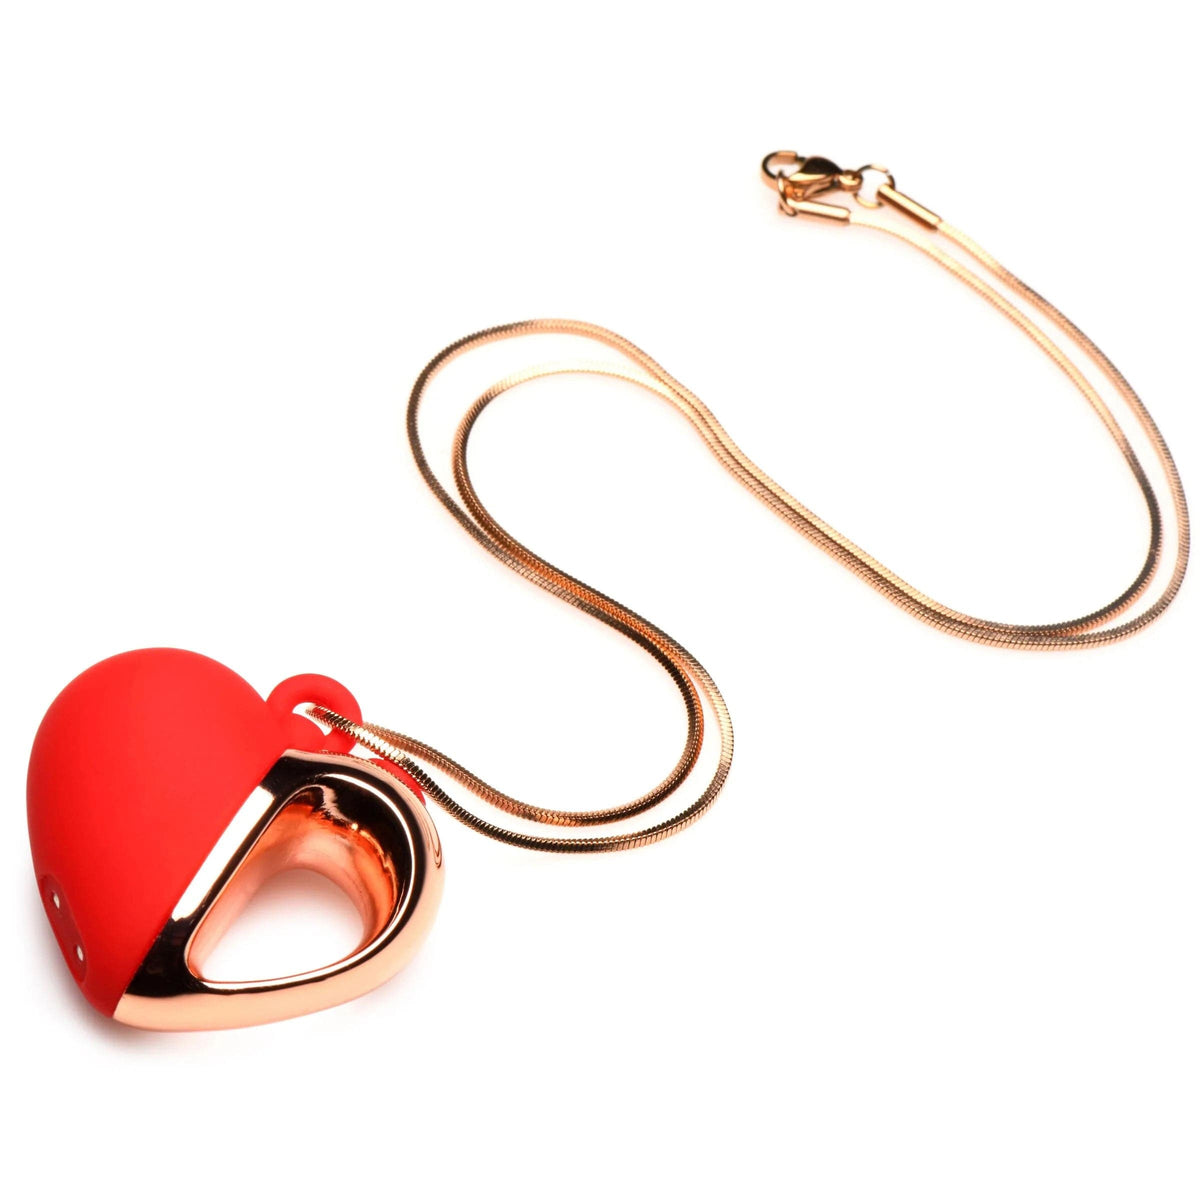 10x vibrating silicone heart necklace rose gold red